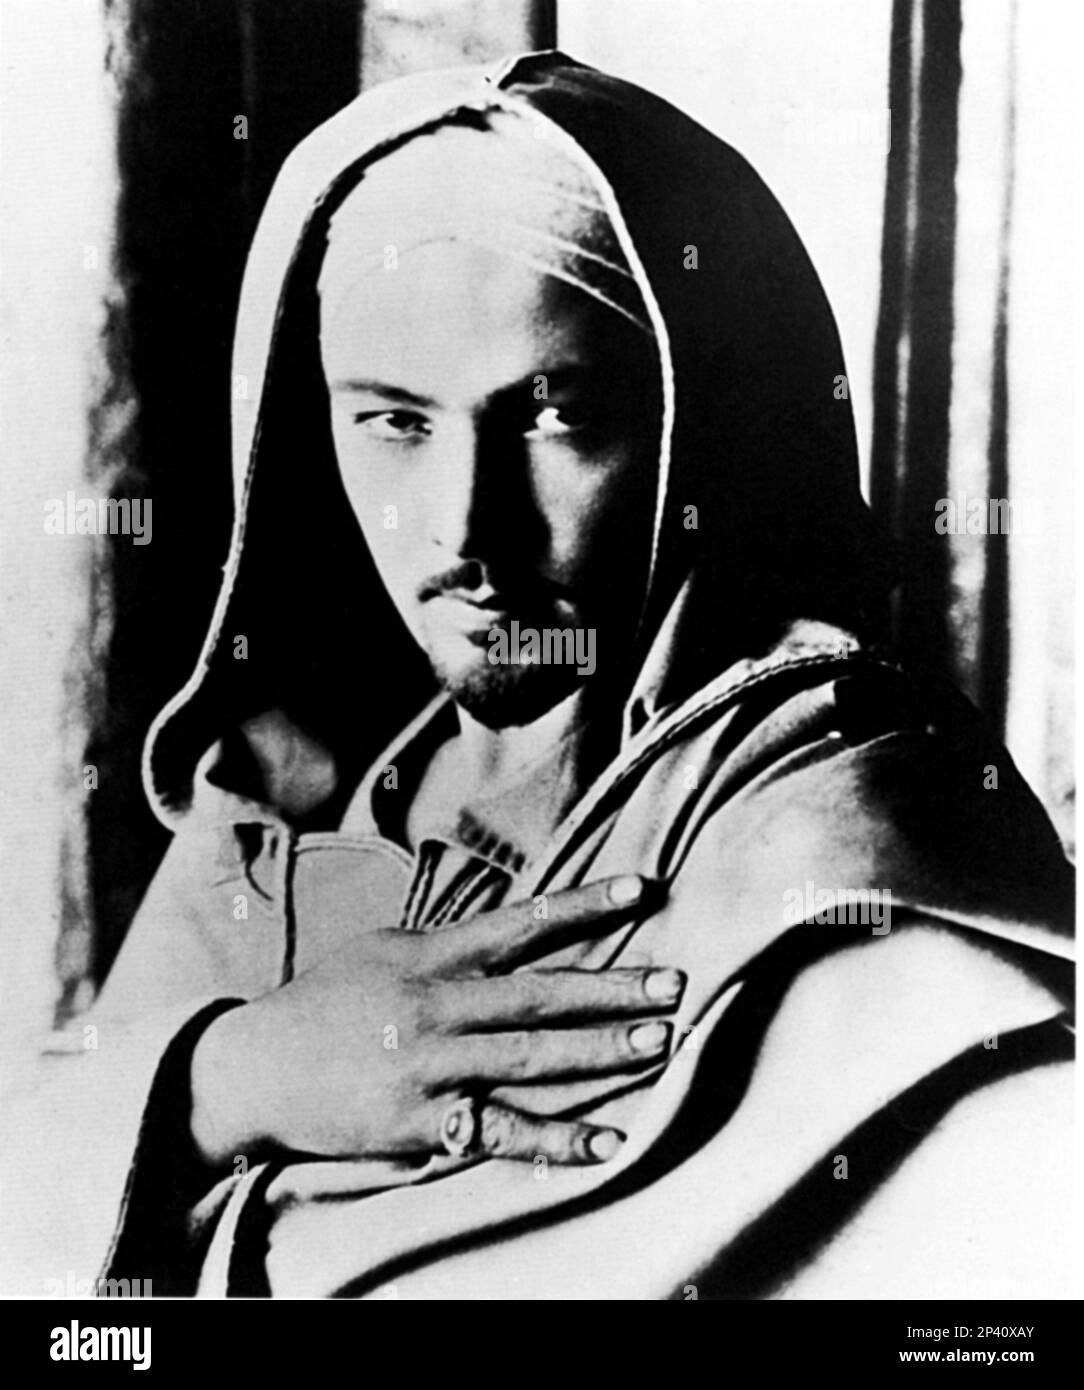 'Le Fils du Sheik The Son of the Sheik by George Fitzmaurice with Rudolph  Valentino and Vilma Banky,' Photo | Art.com